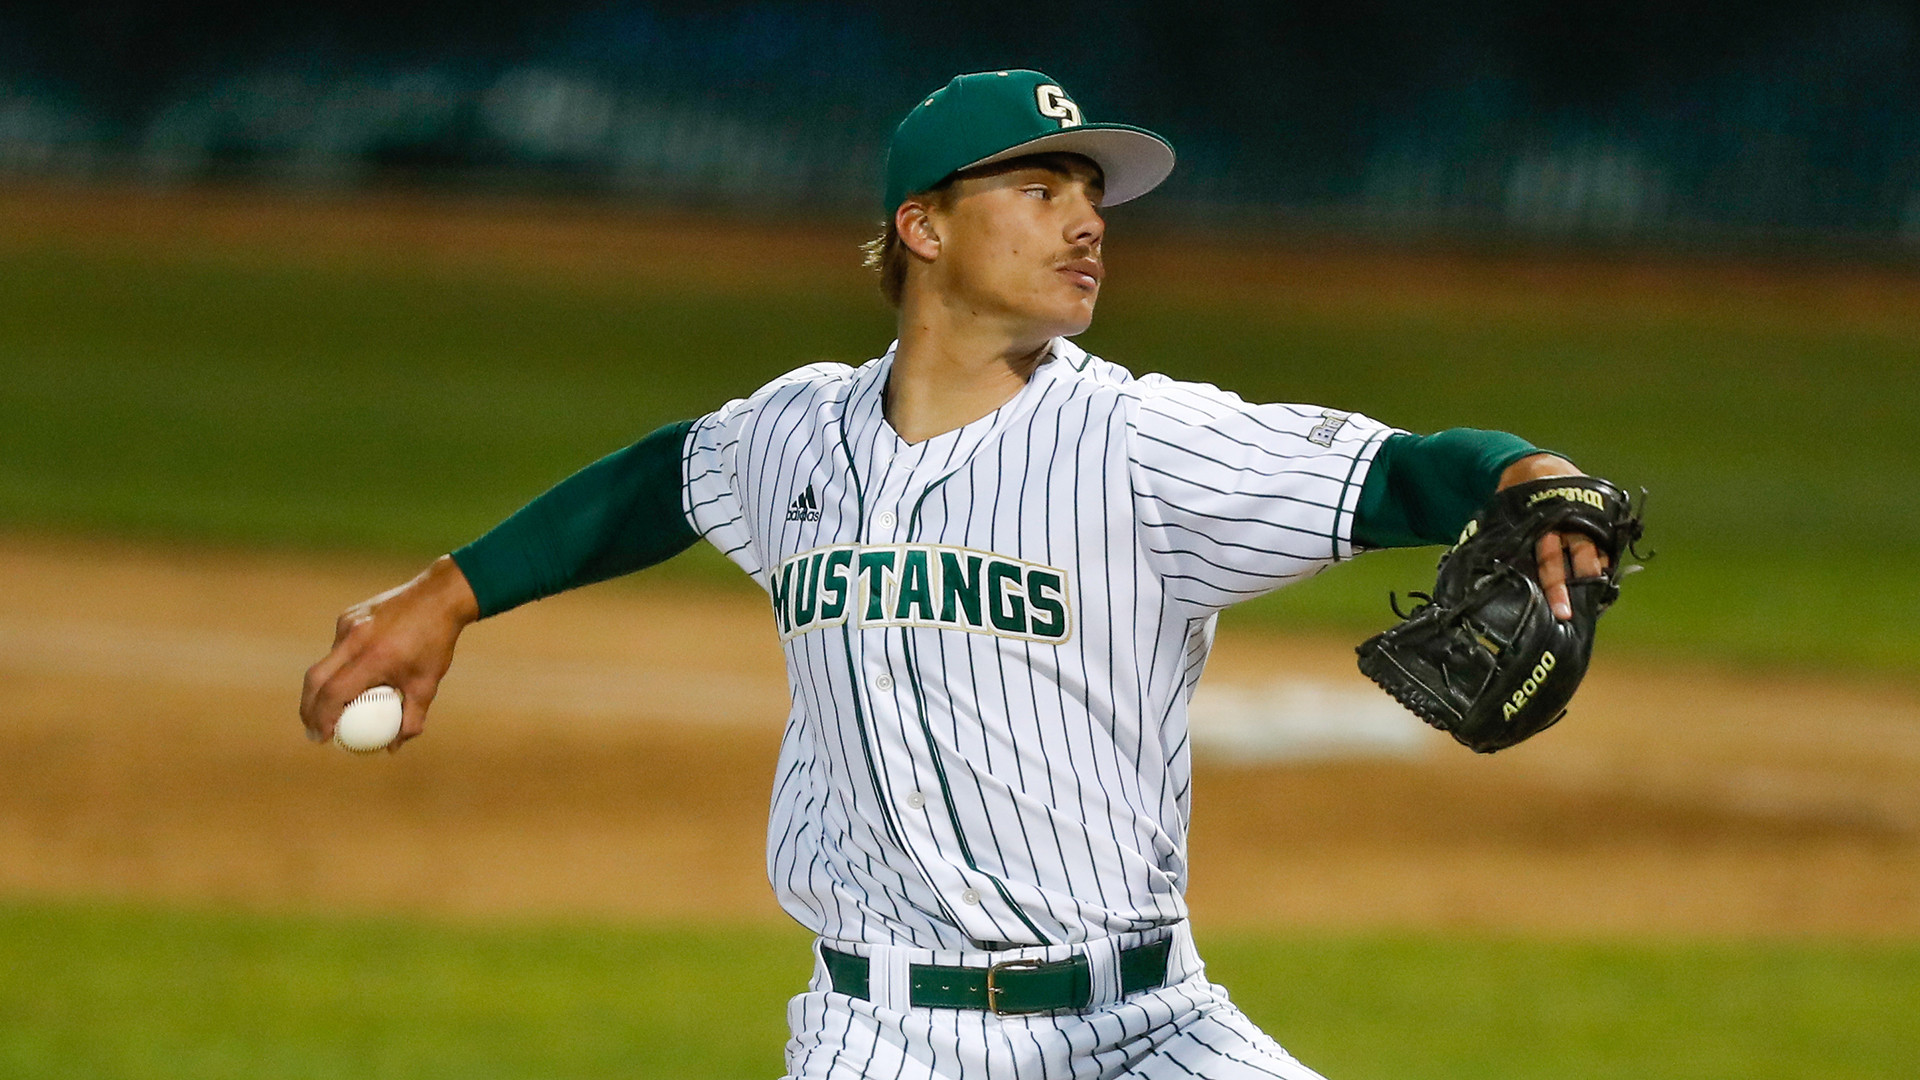 The California Polytechnic State University baseball team have won more than 600 games under Larry Lee since he took over as head coach in 2003 ©Cal Poly